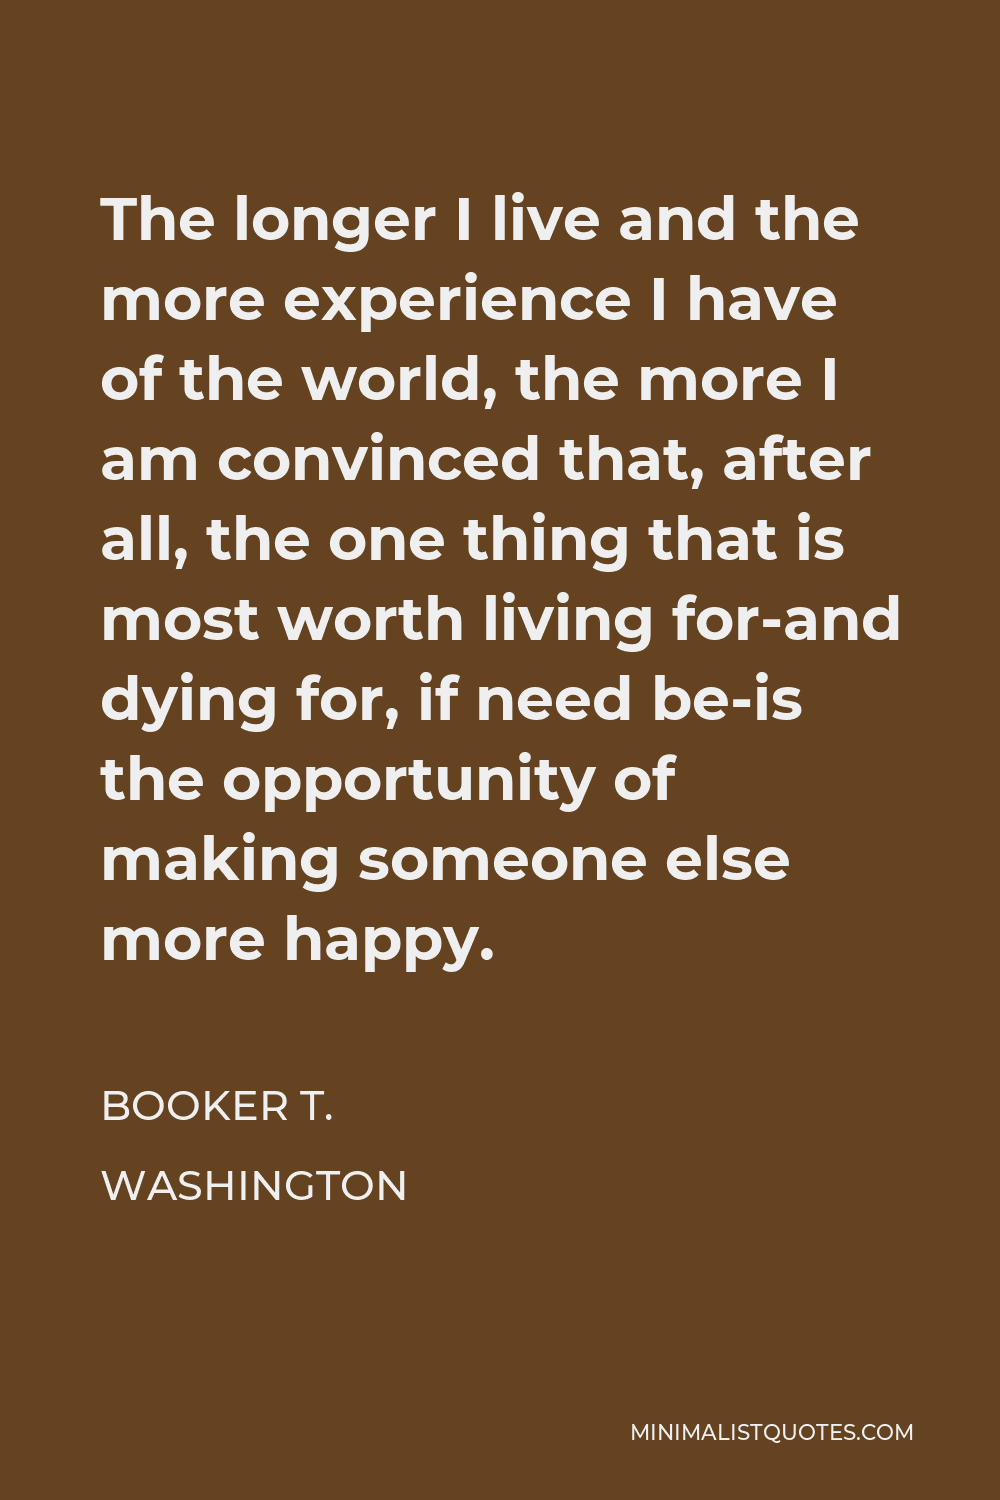 Booker T. Washington Quote - The longer I live and the more experience I have of the world, the more I am convinced that, after all, the one thing that is most worth living for-and dying for, if need be-is the opportunity of making someone else more happy.